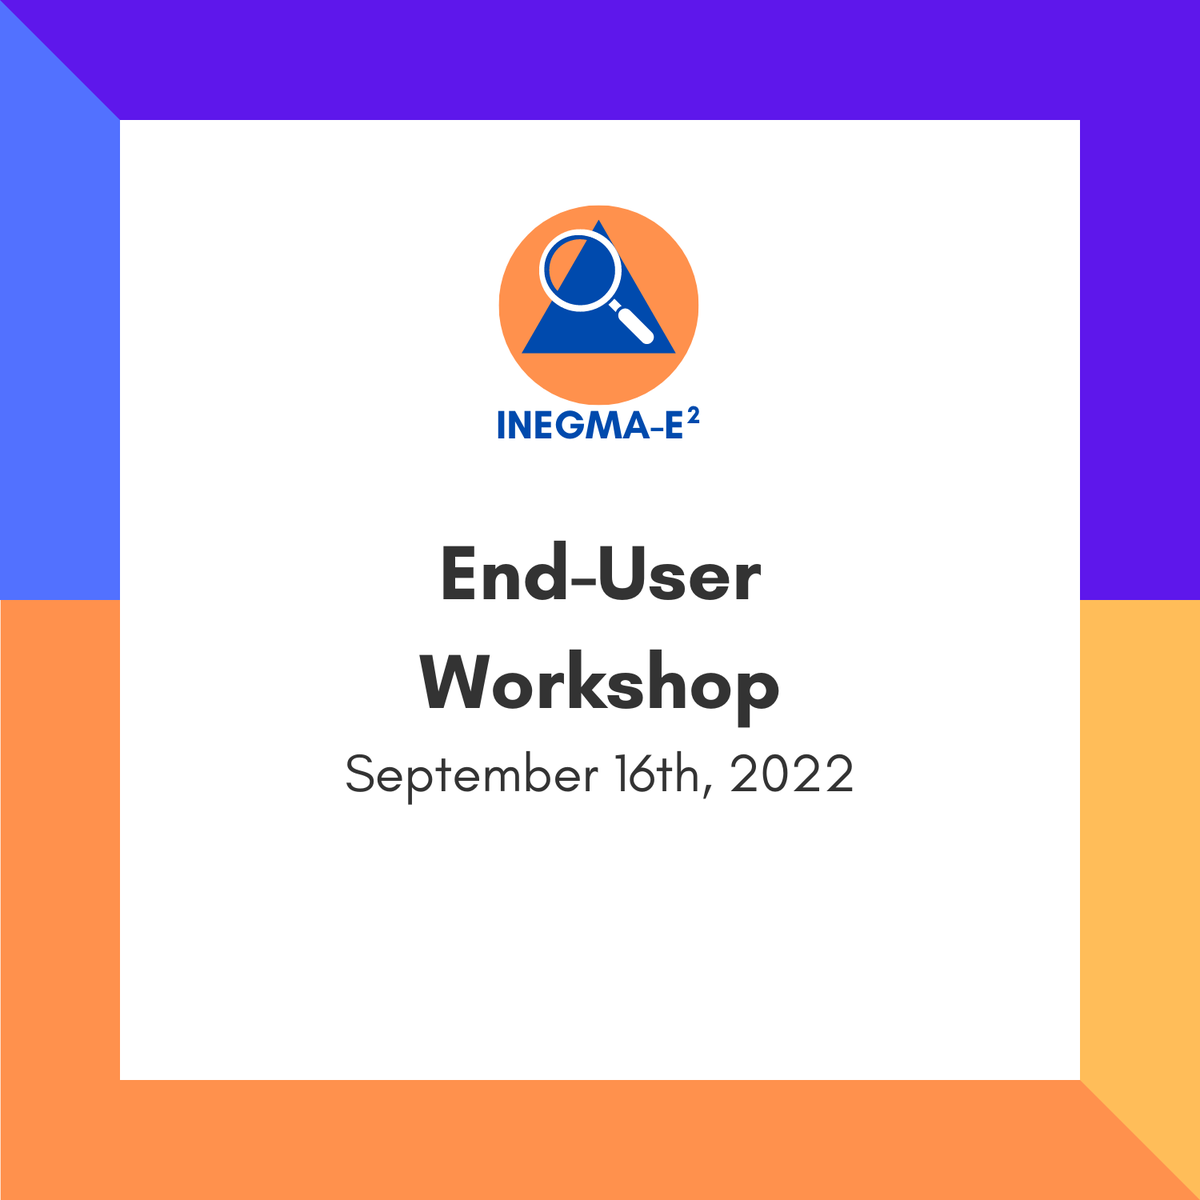 Attention 📢 Our next end-user workshop will take place on Sep 16th as an online event and we are looking for end-users with experience in #exerciseevaluation.

Interested in participating? Sign up until Sep 12th via office@inegma-e2.eu

More info: …rotection-knowledge-network.europa.eu/events/inegma-…